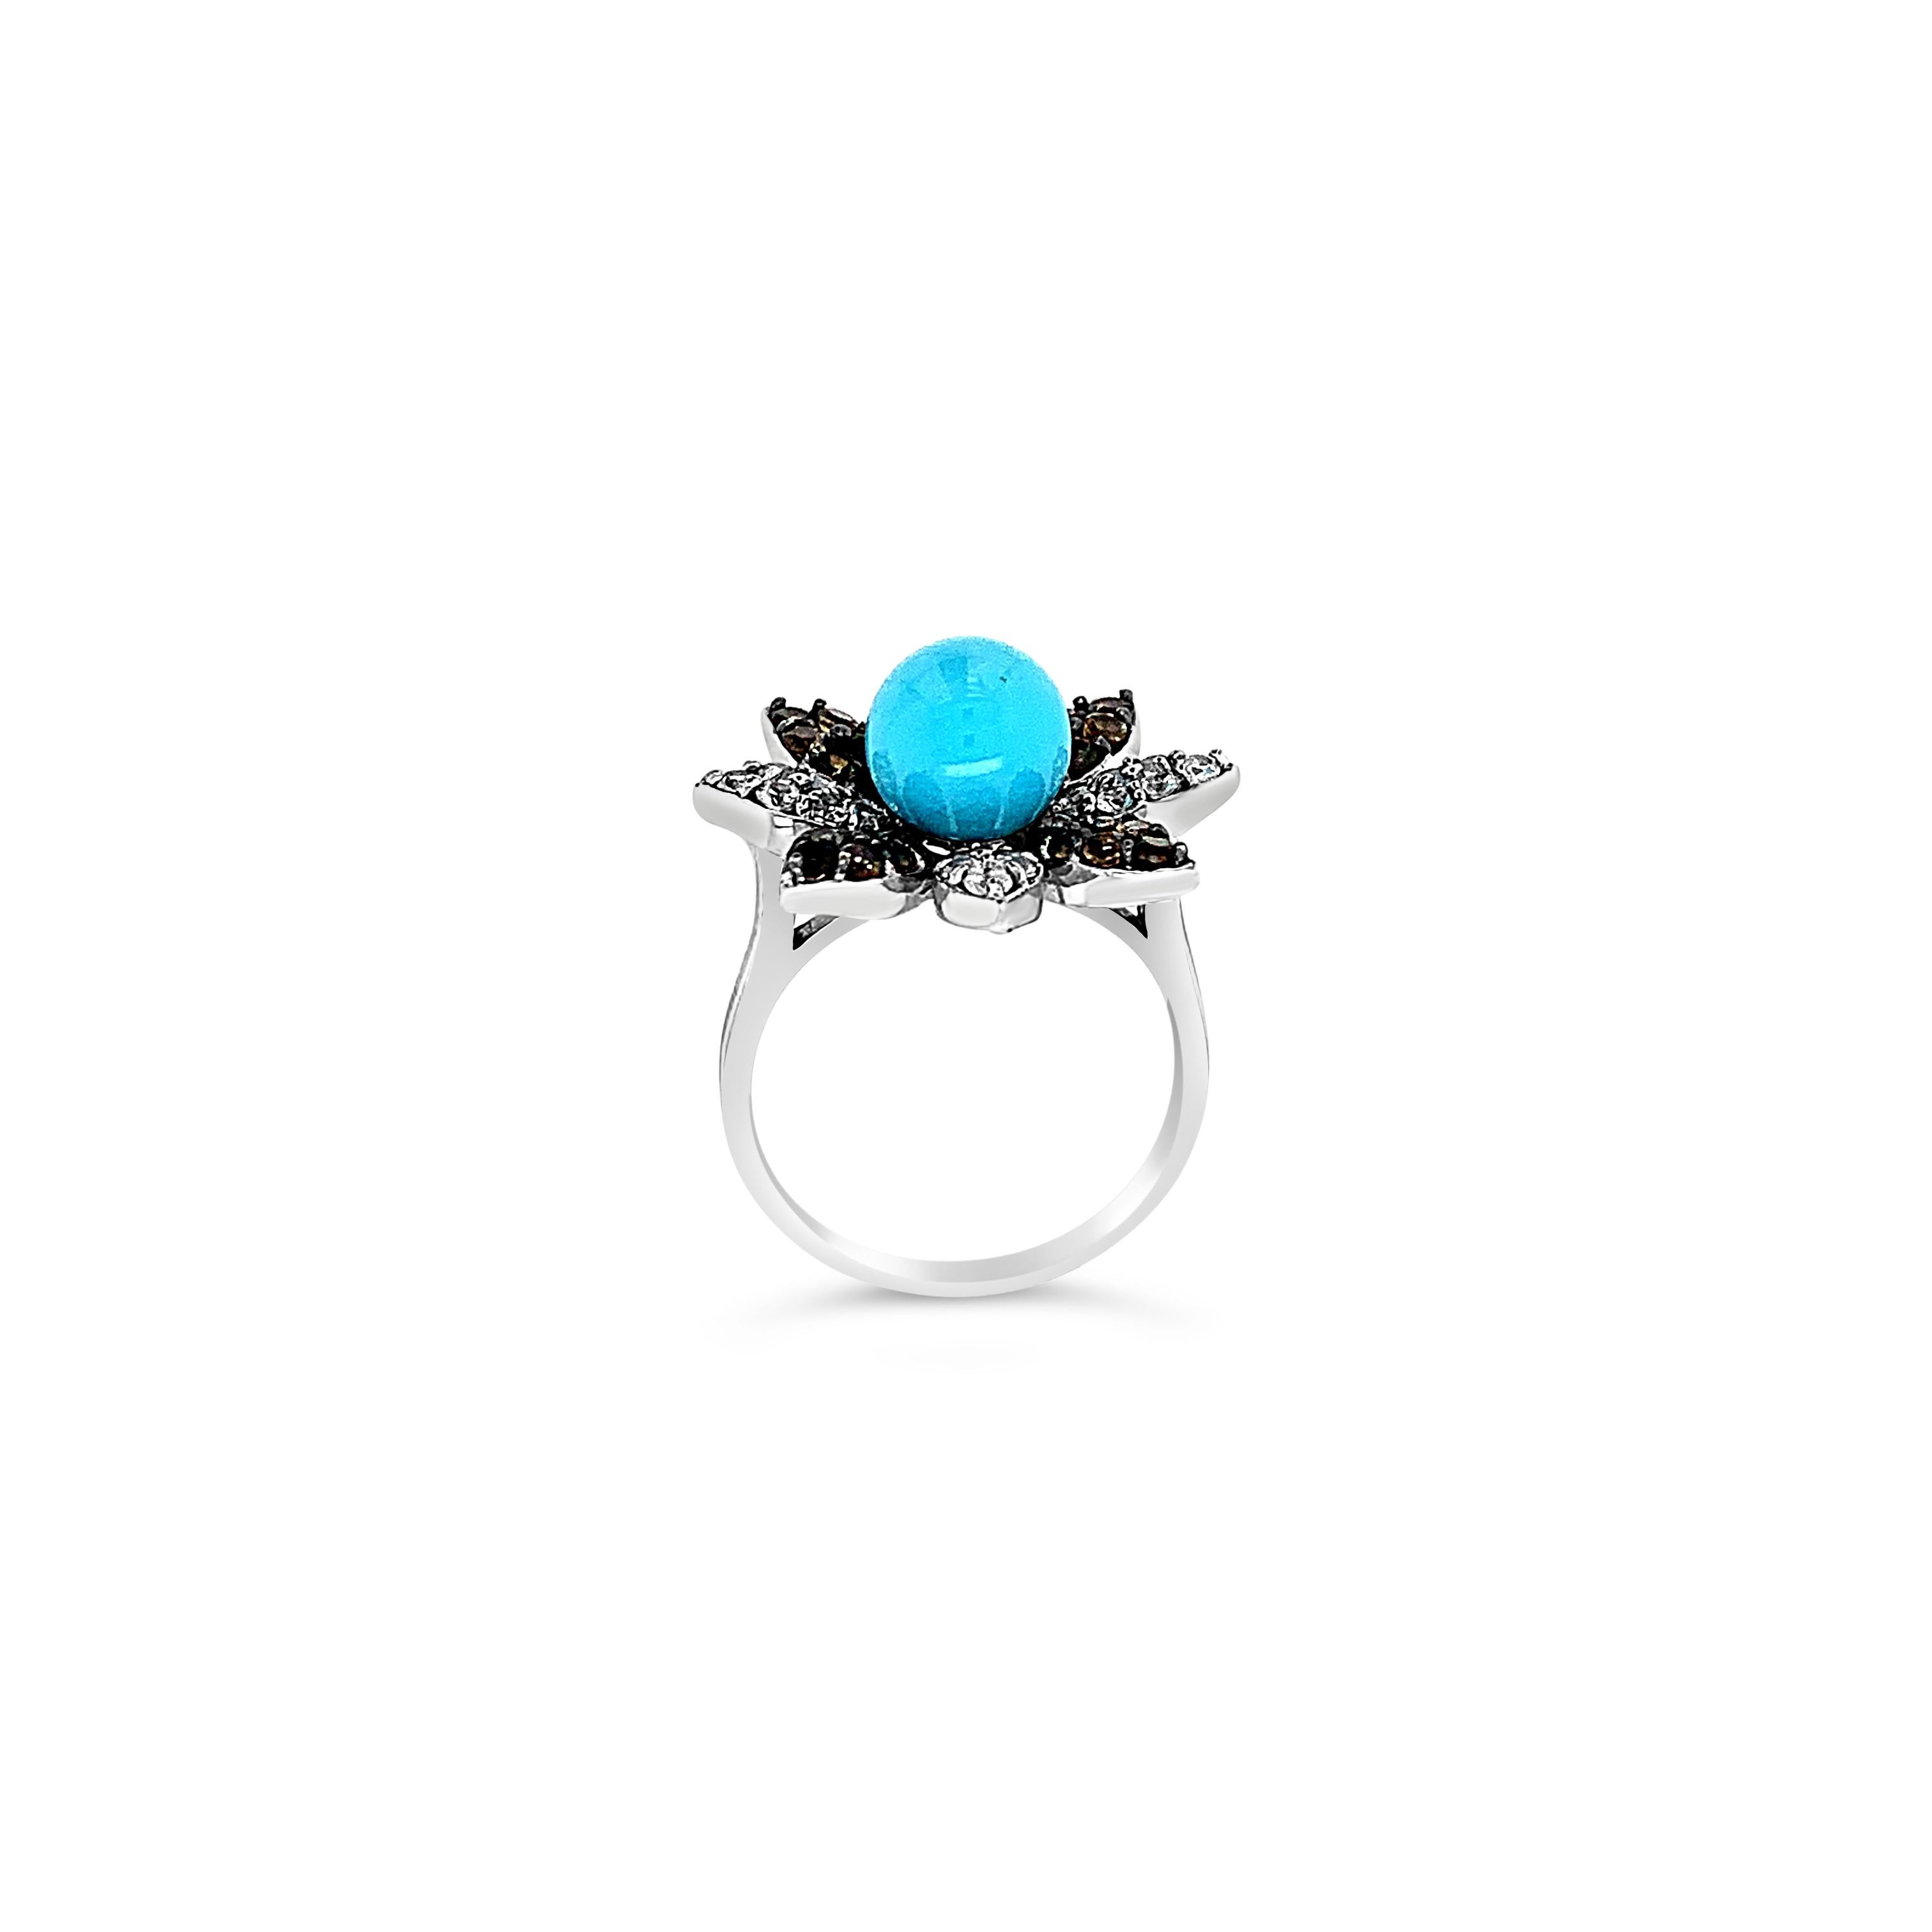 Carlo Viani® Ring featuring 3 1/3 cts. Robins Egg Blue Turquoise™, 1/2 cts. White Sapphire, 3/8 cts. Chocolate Quartz®,  set in 14K Vanilla Gold®

Diamonds Breakdown:
None

Gems Breakdown:
3 1/3 cts Turquoise
1/2 cts White Sapphire
3/8 cts Smoky